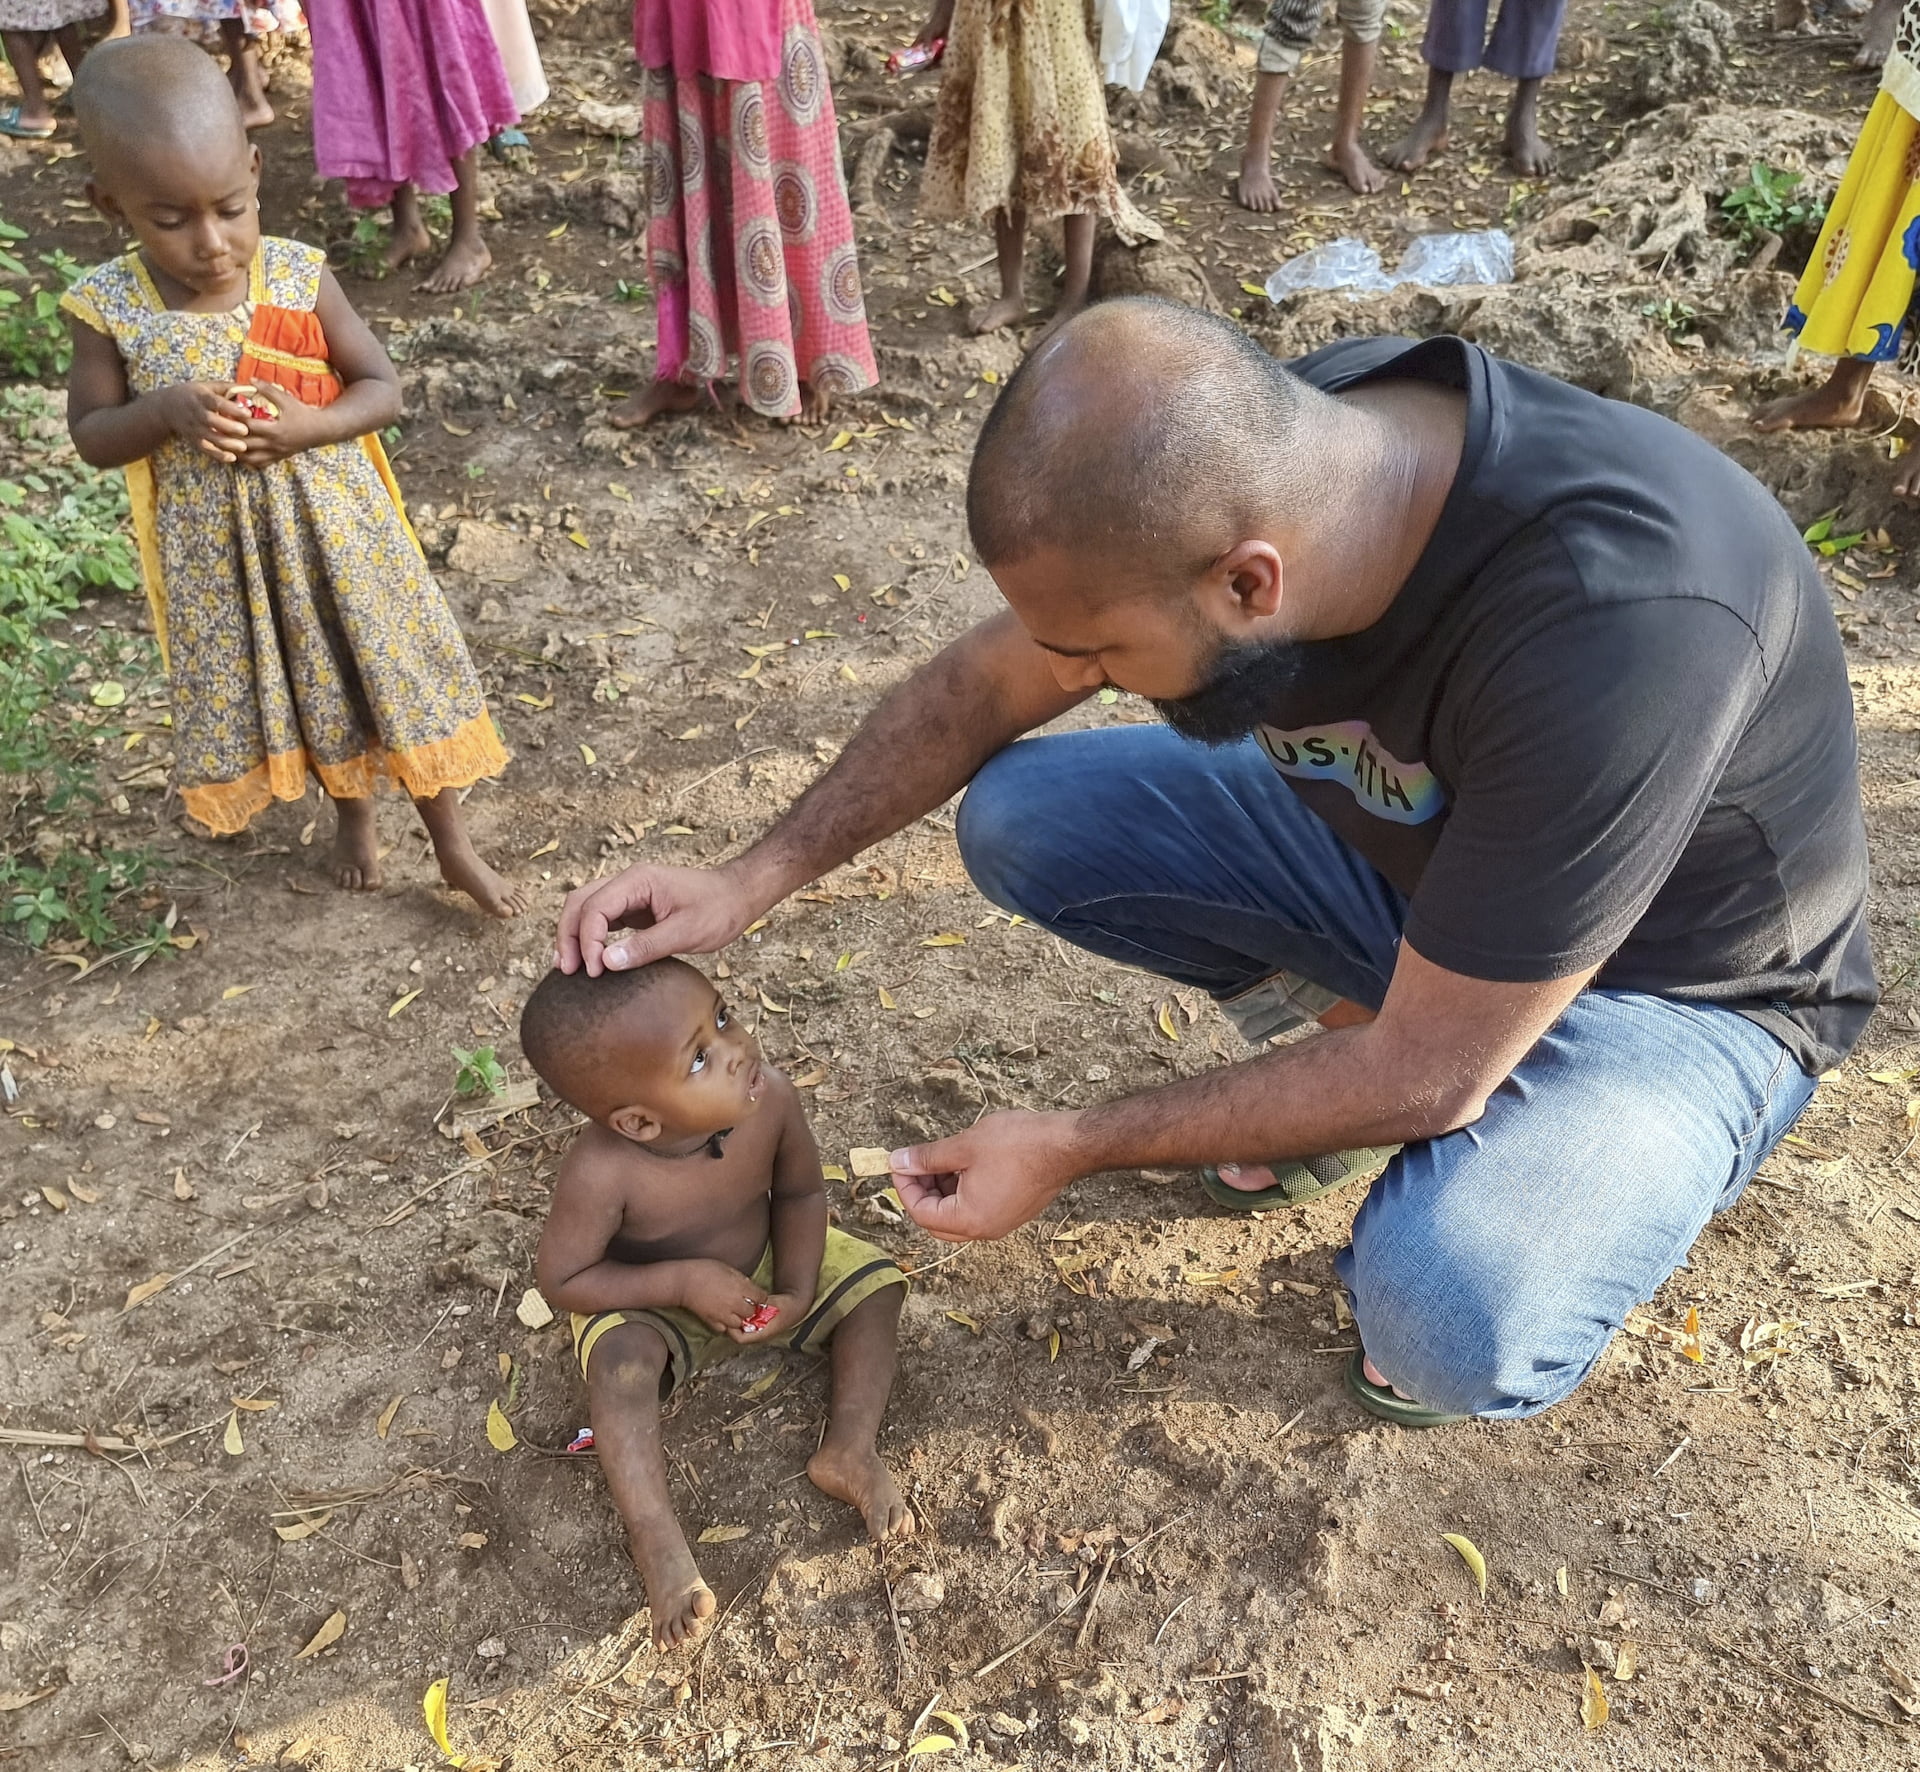 A man kneeled down offering food to a poor child sat in the dirt